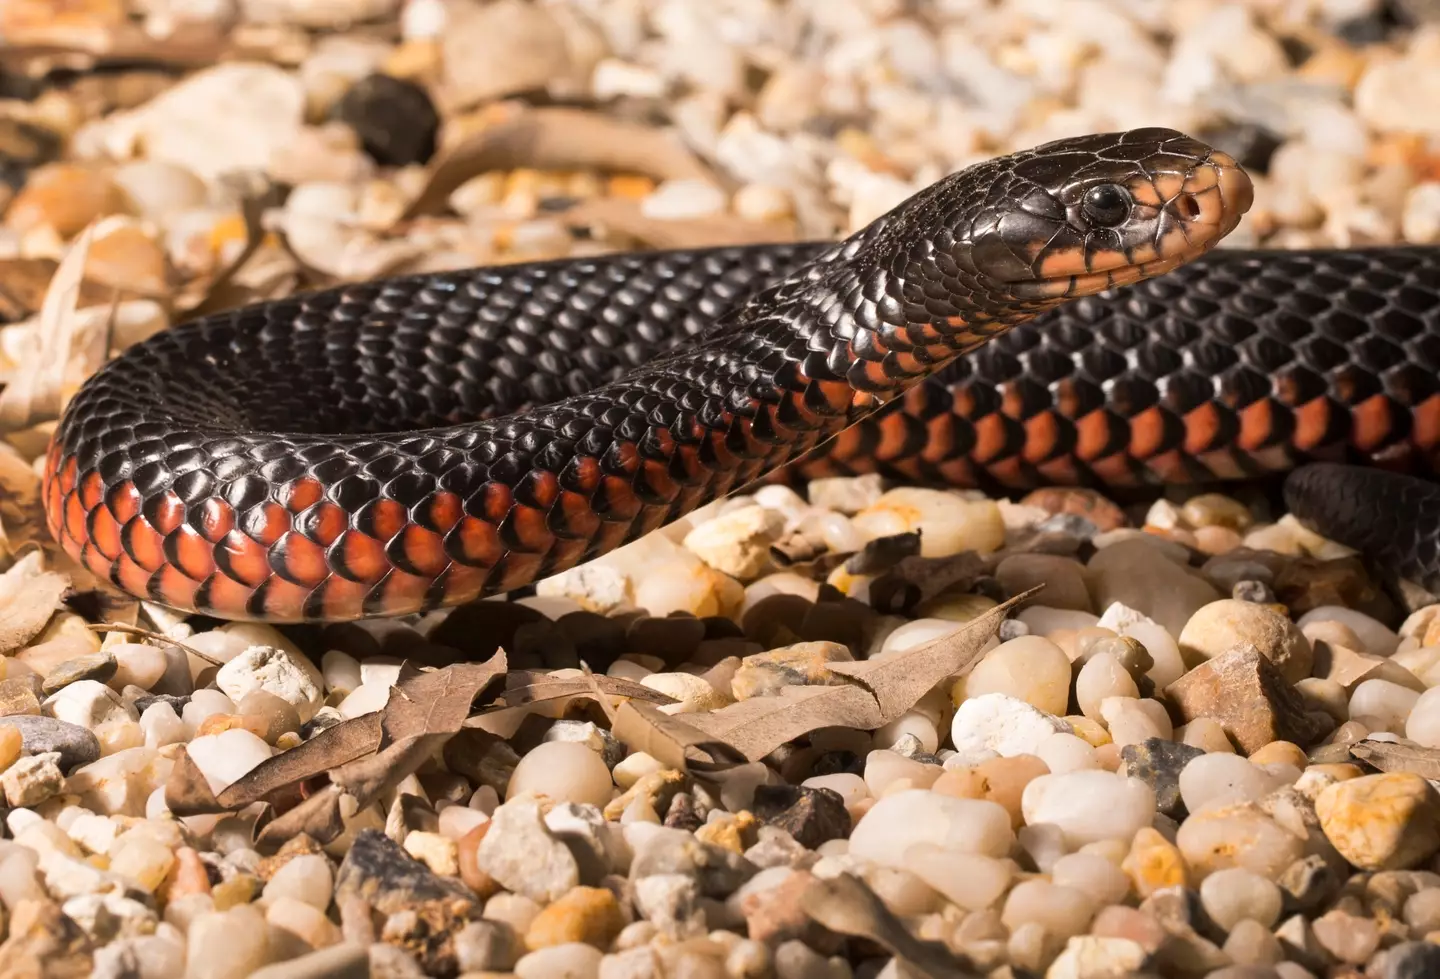 Red-bellied black snakes are often found in parts of eastern Australia. (Jono Searle / Contributor)